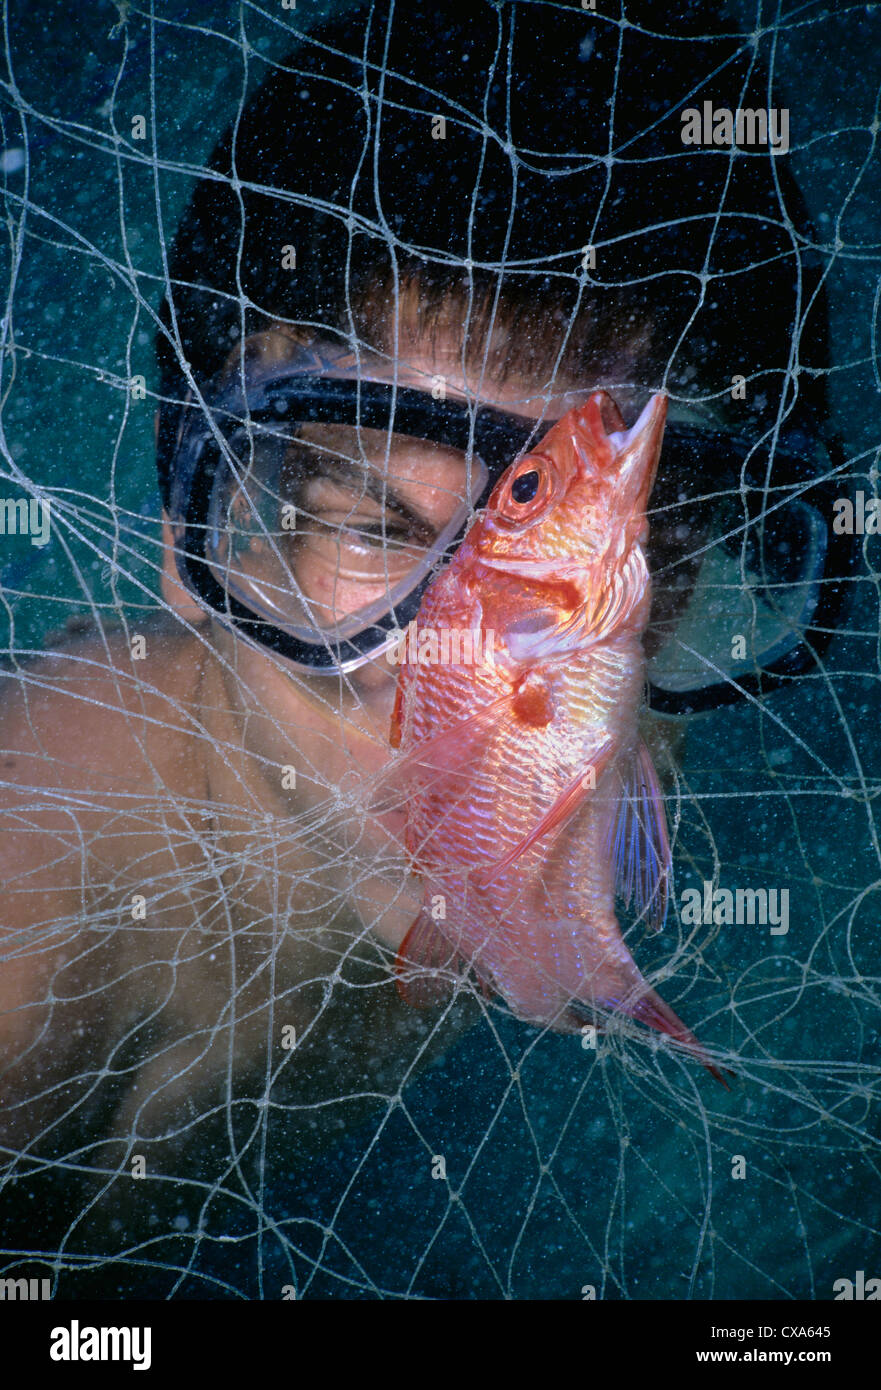 Diver observes Silverspot Squirrelfish caught in Bedouin gill net (Adioryx caudimaculatus). Egypt, Red Sea Stock Photo